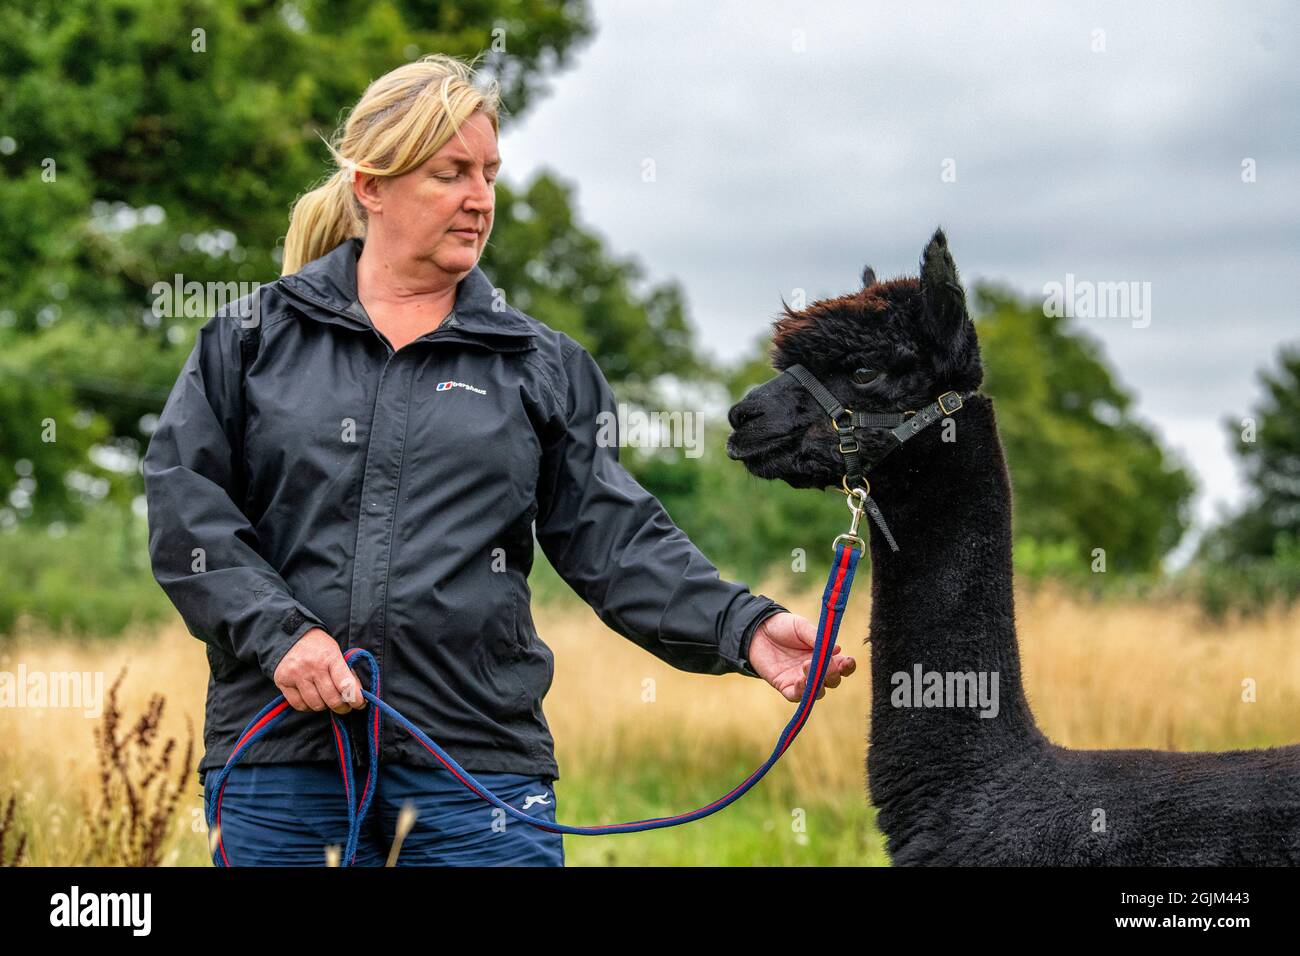 Geronimo the alpaca awaits his fate at Shepherds Close Farm Gloucestershire. Pictured with owner Helen Macdonald. Bovine TB. Stock Photo